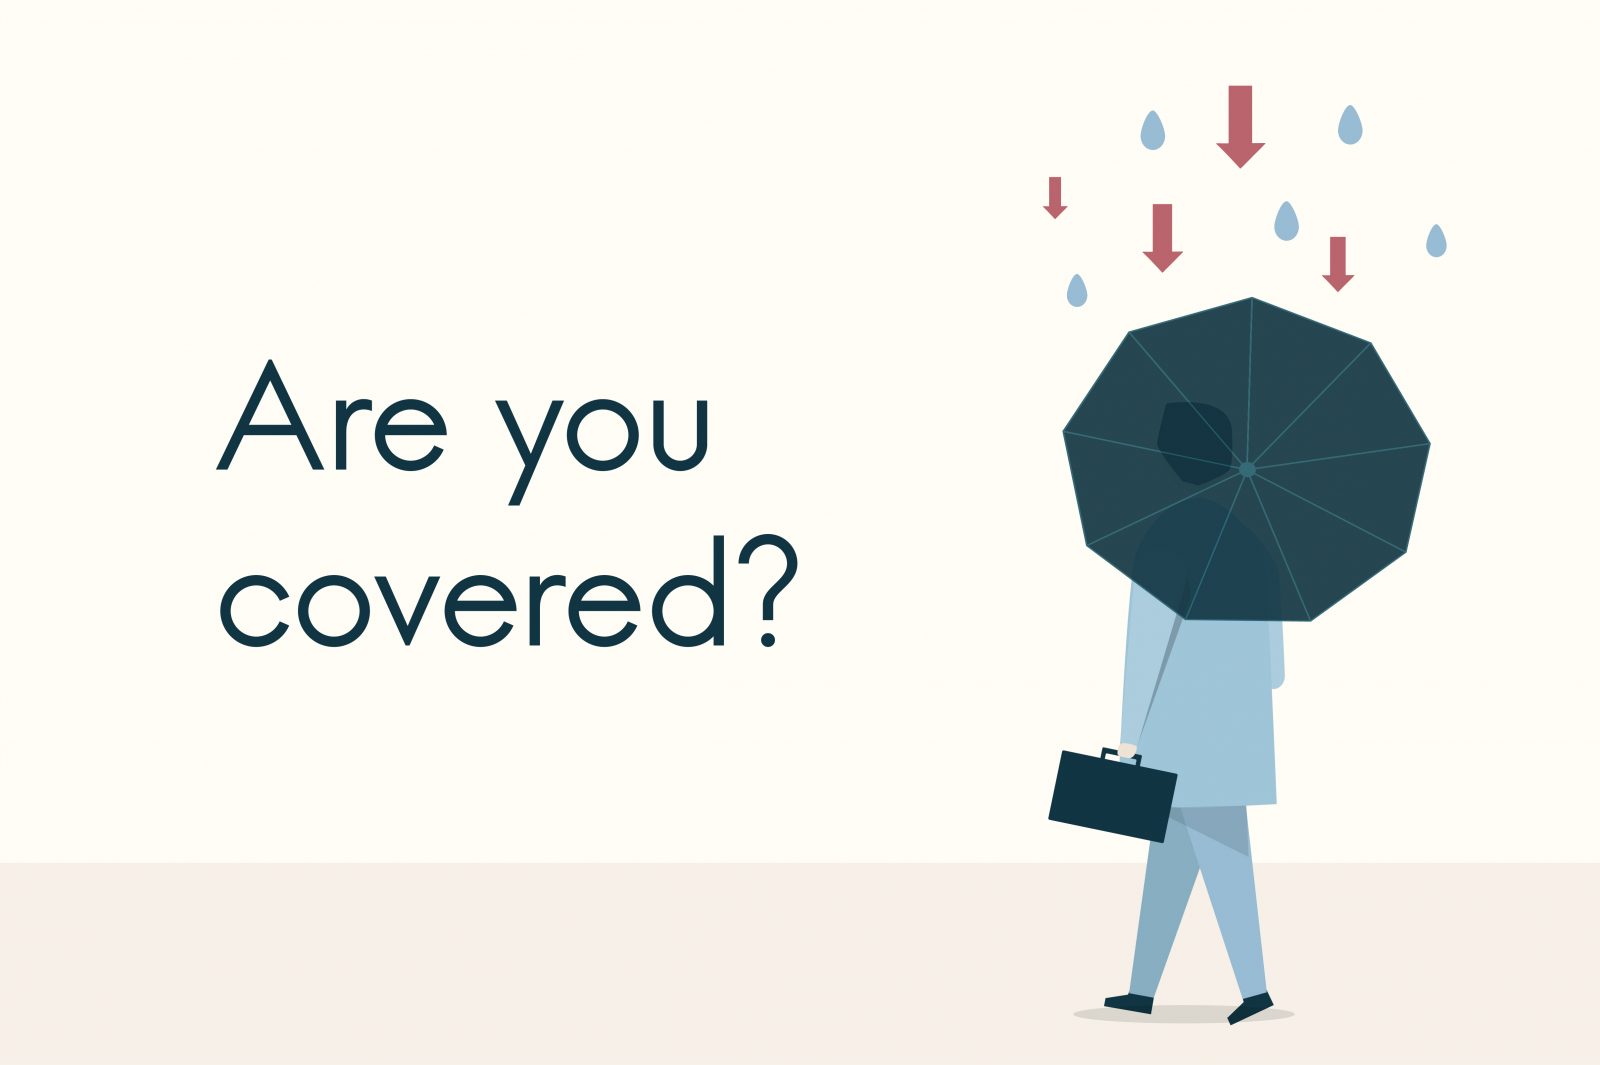 A person holding an umbrella and on the side written "Are you covered?" referring to being covered with chargeback insurance.